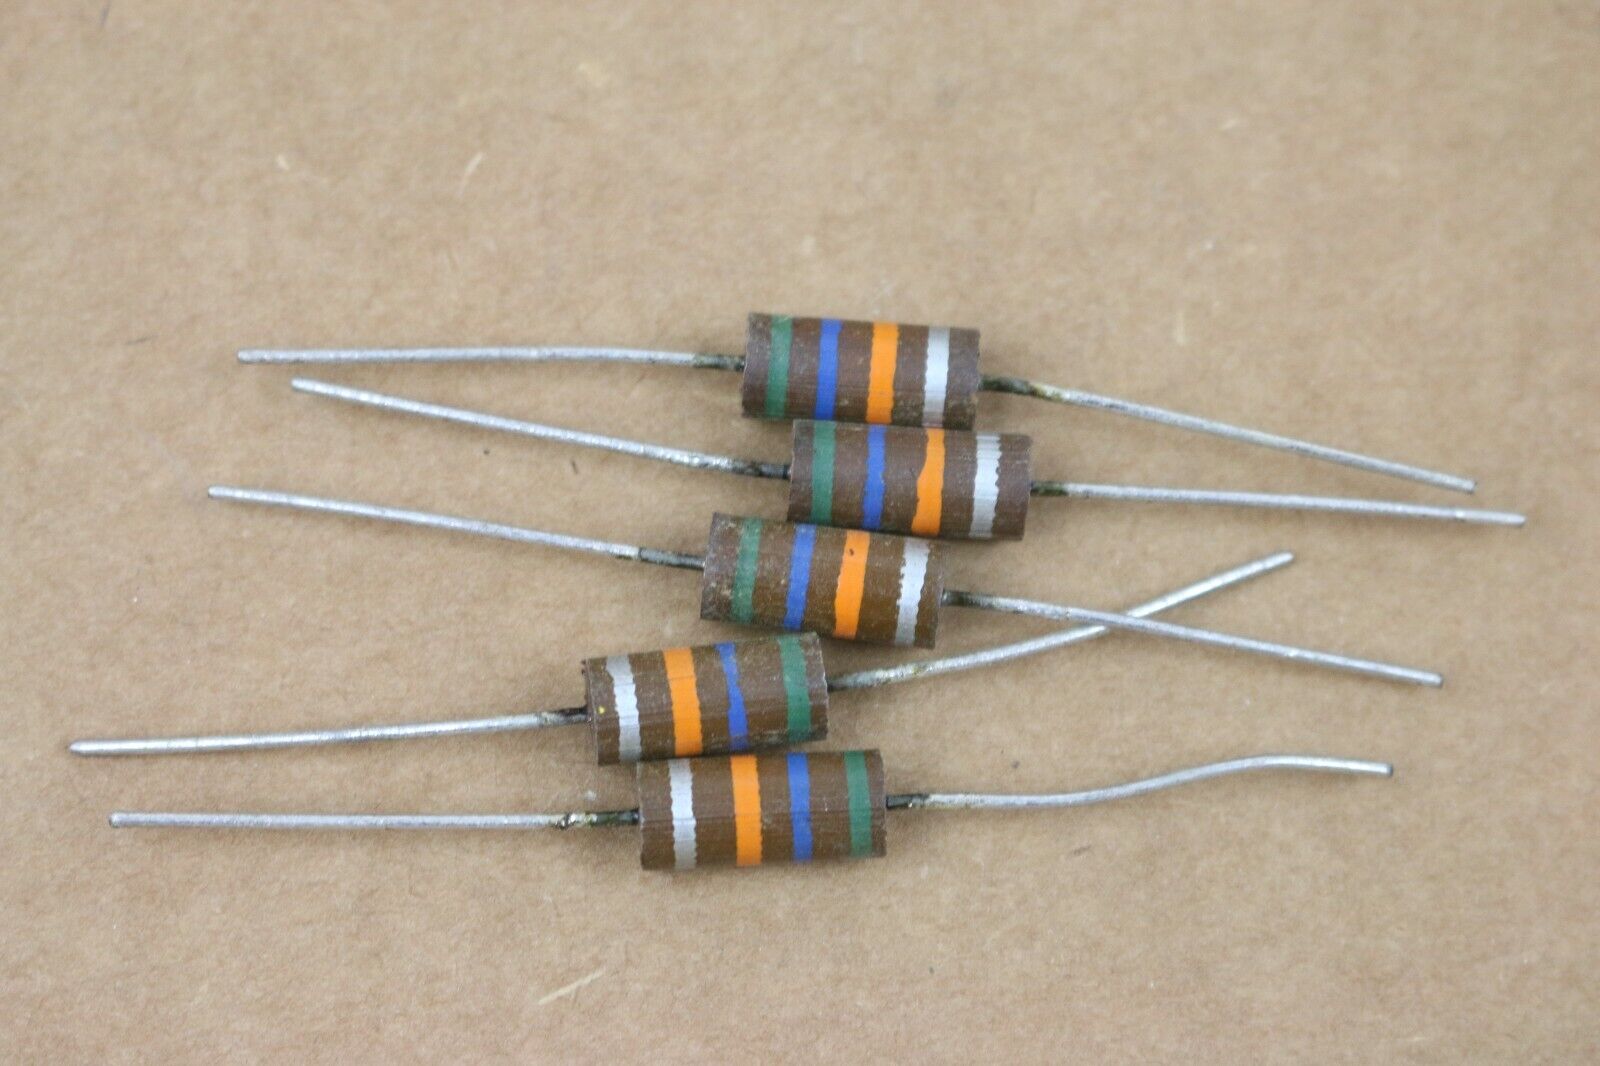 Lot of 5 Vintage 56k Ohm Resistor 2W 10% NOS Carbon Comp Tested, Axial, 2 Watt